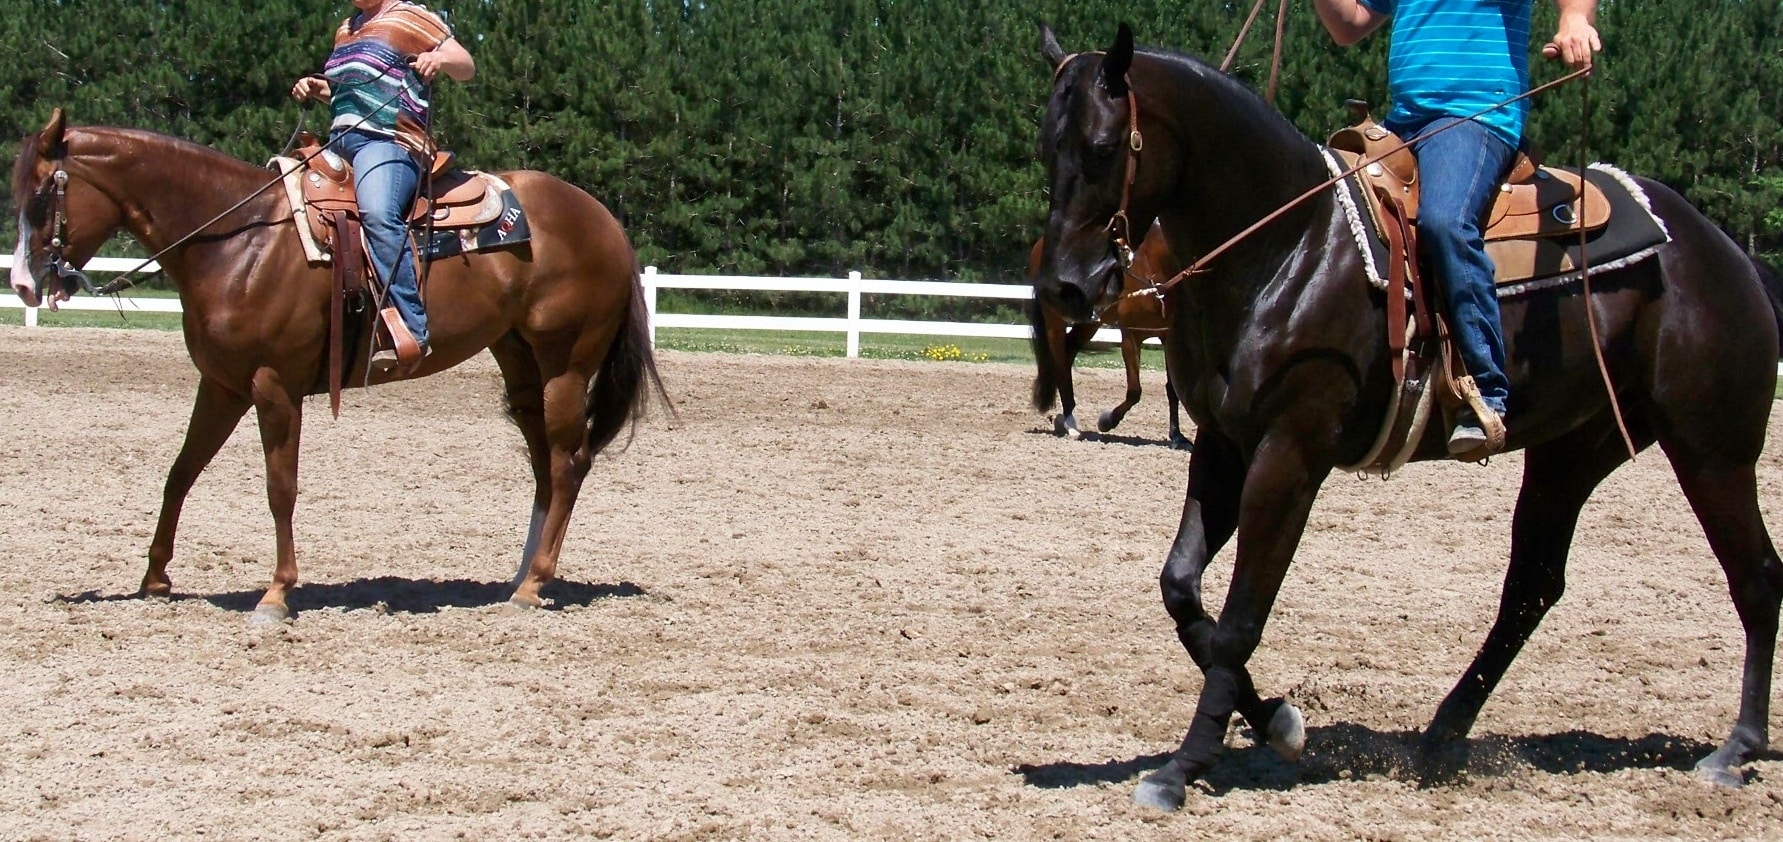 Forceful training. Riders working horses from the bridle